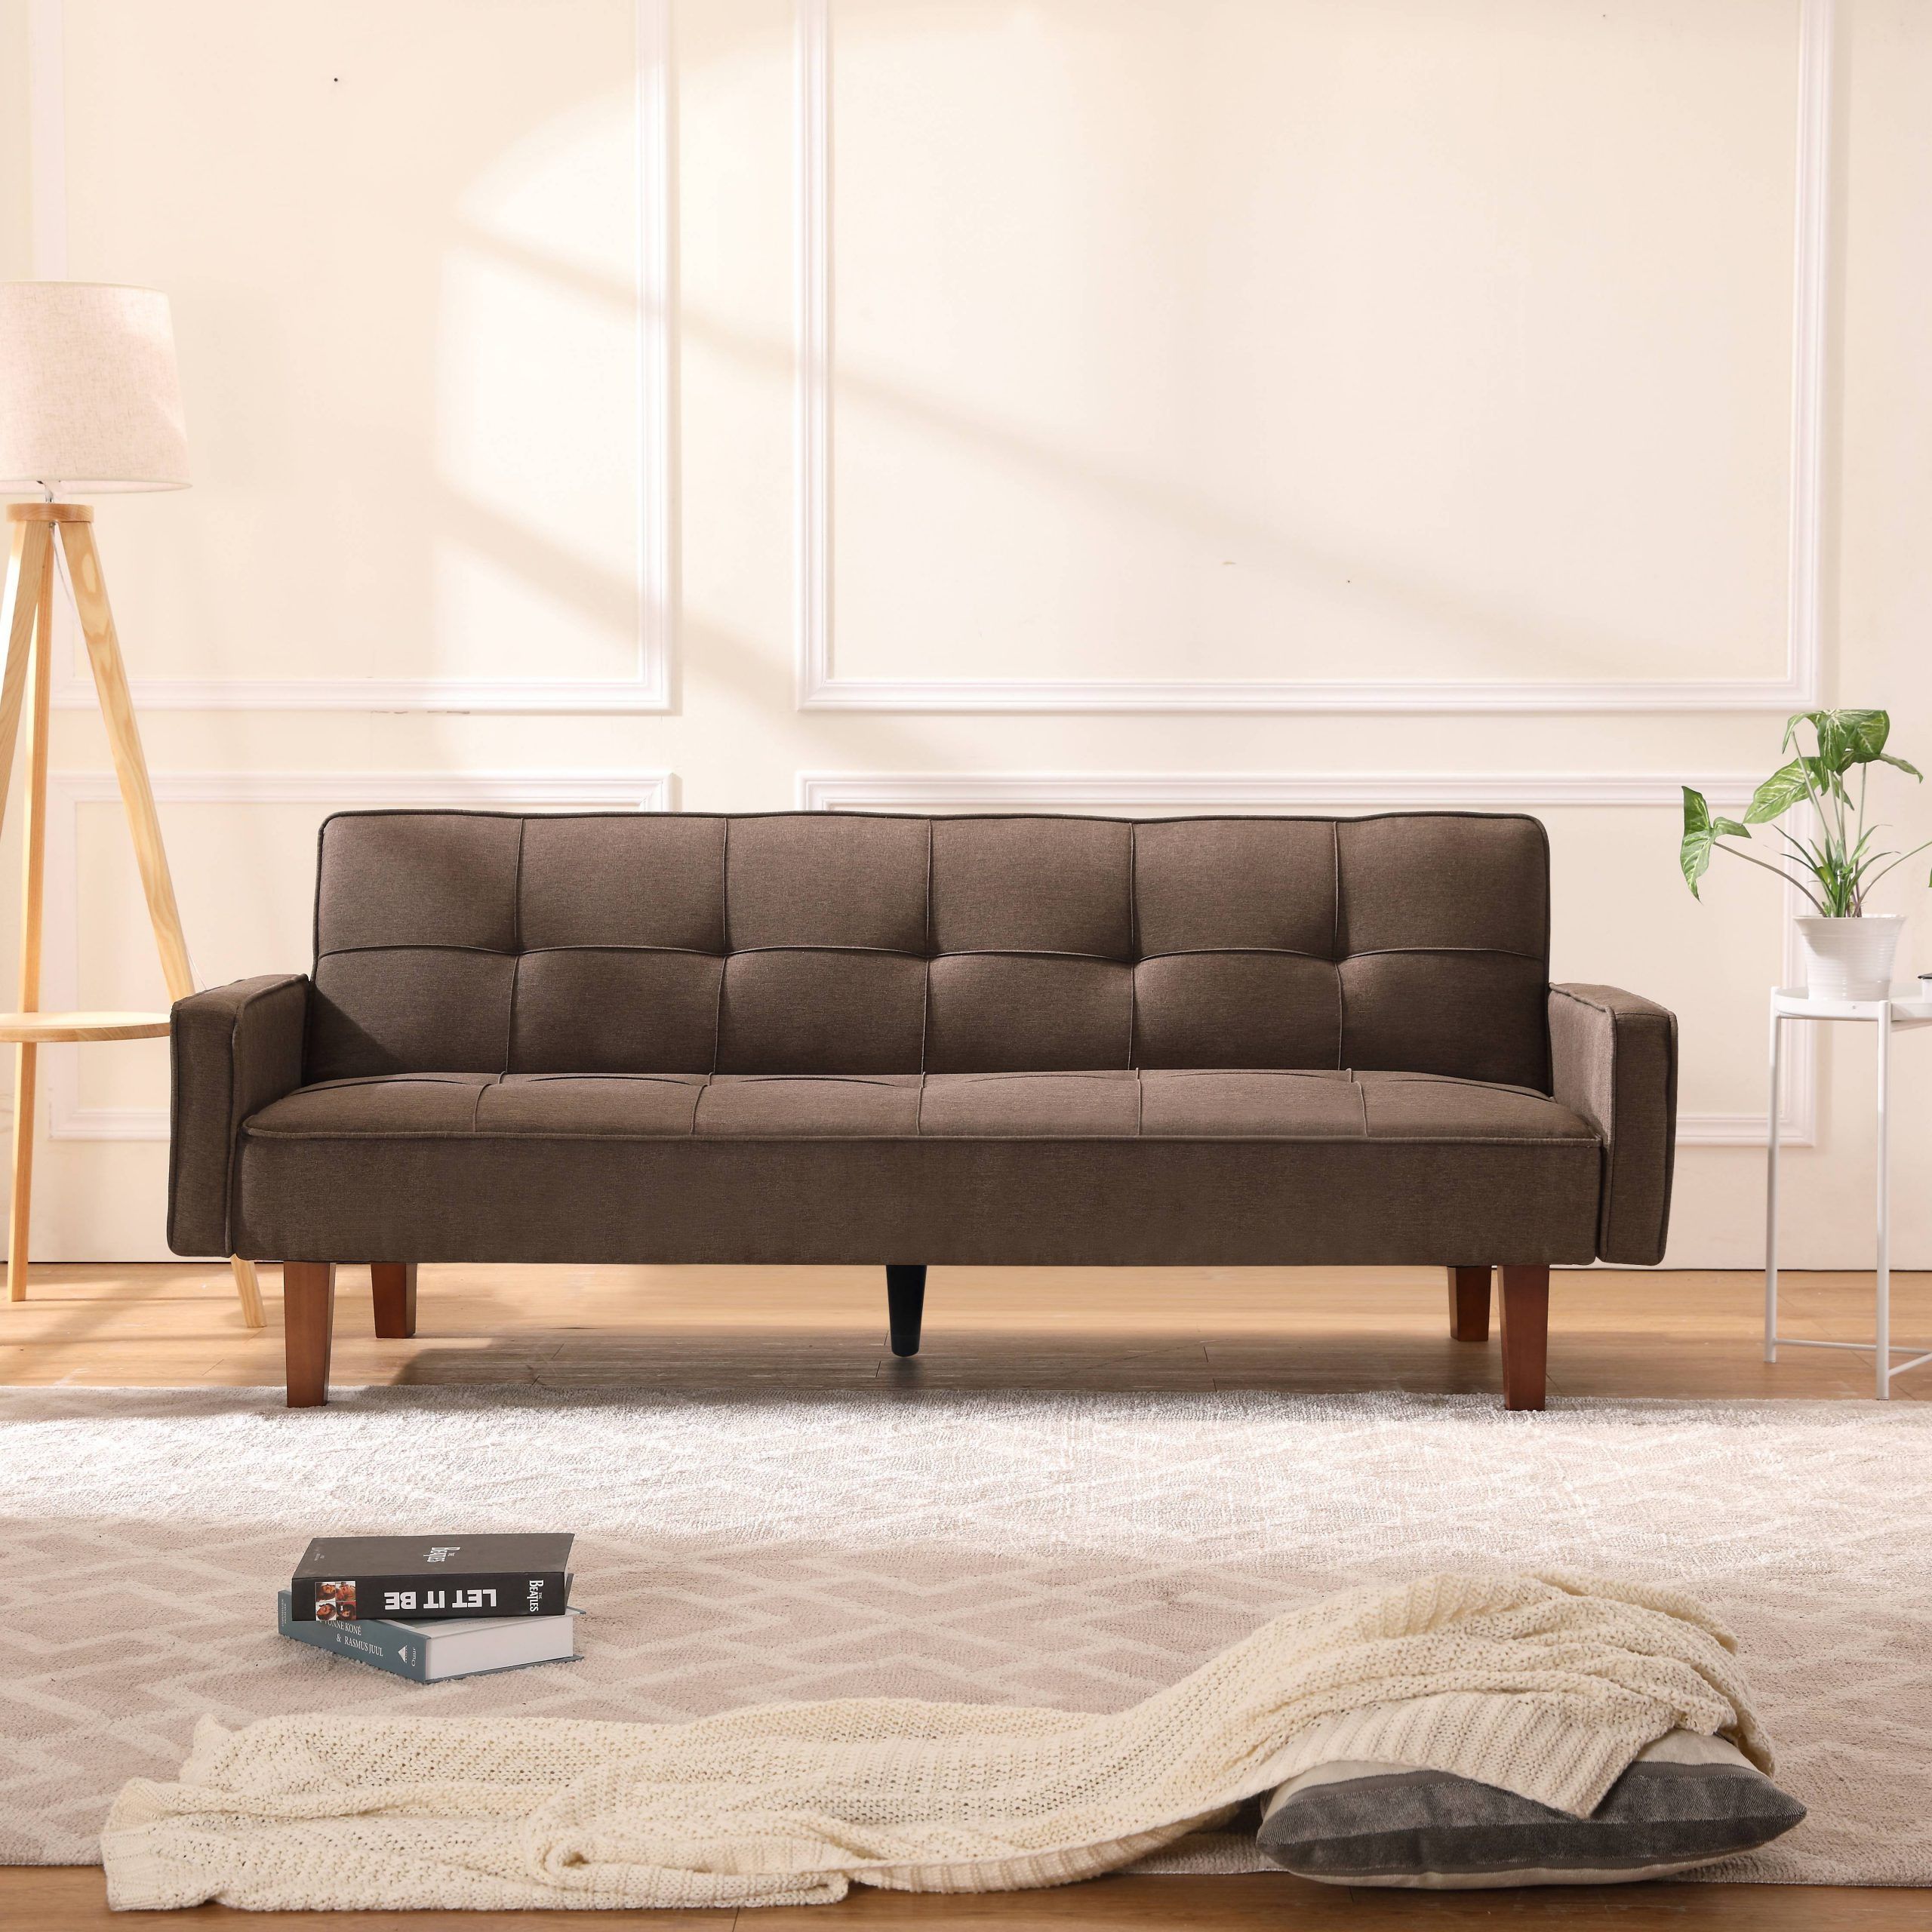 Clearance! Convertible Sofa Bed, Multi Function Folding In Convertible Sofas (View 12 of 15)